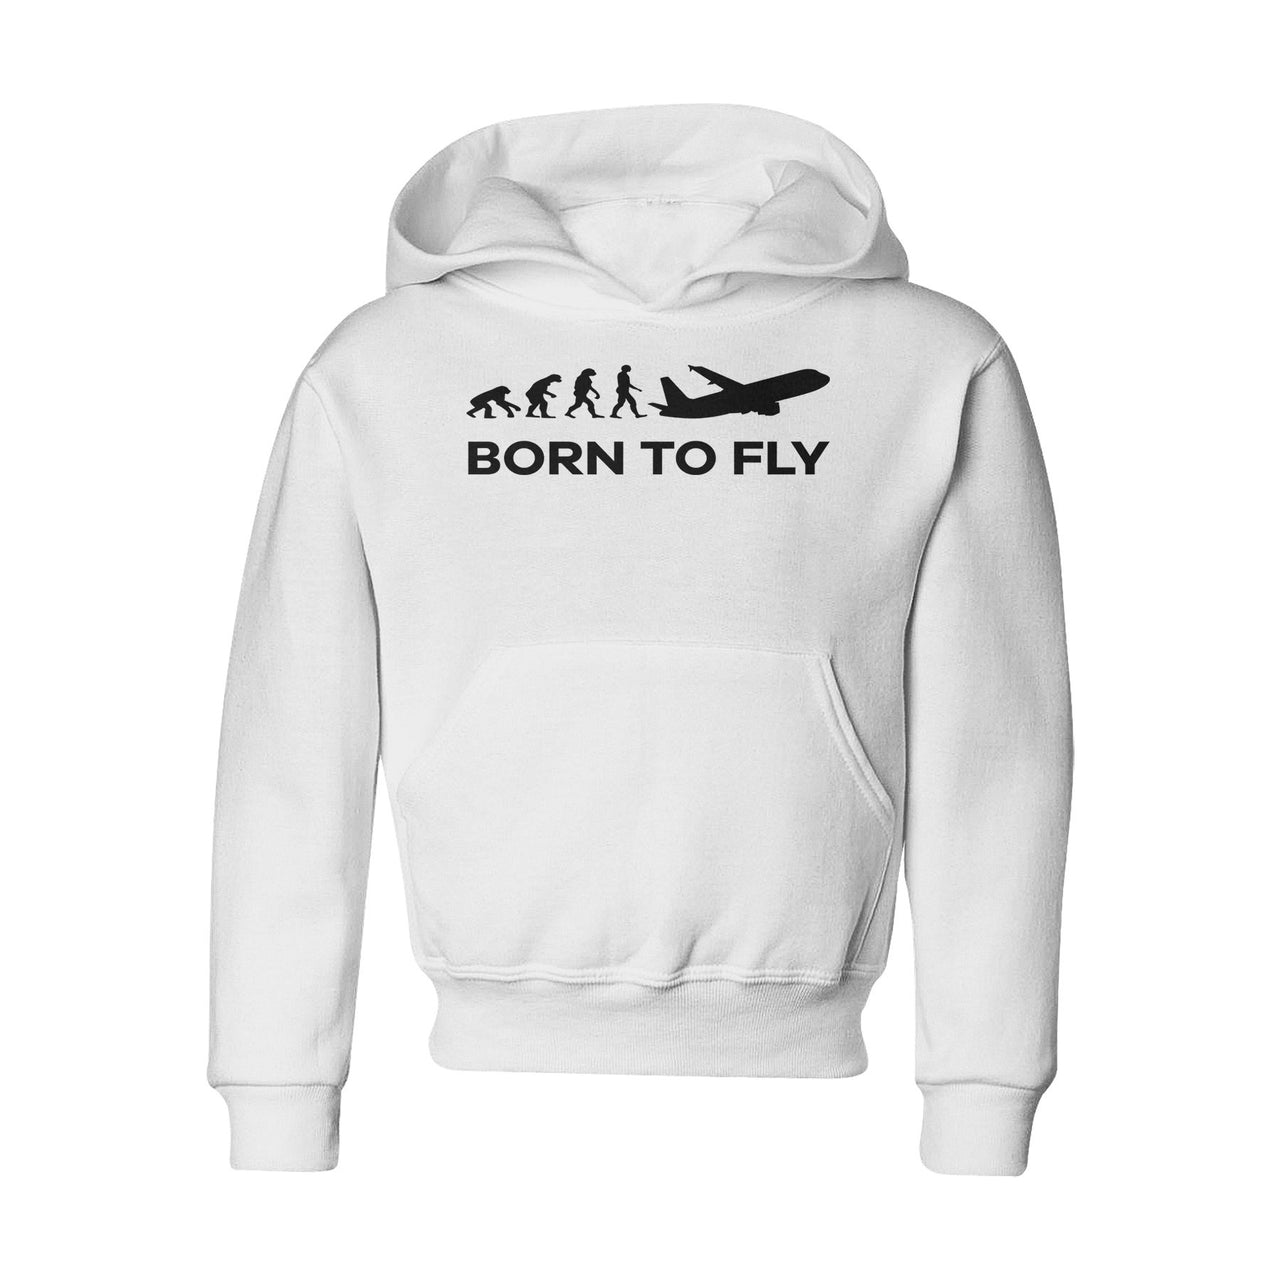 Born To Fly Designed "CHILDREN" Hoodies